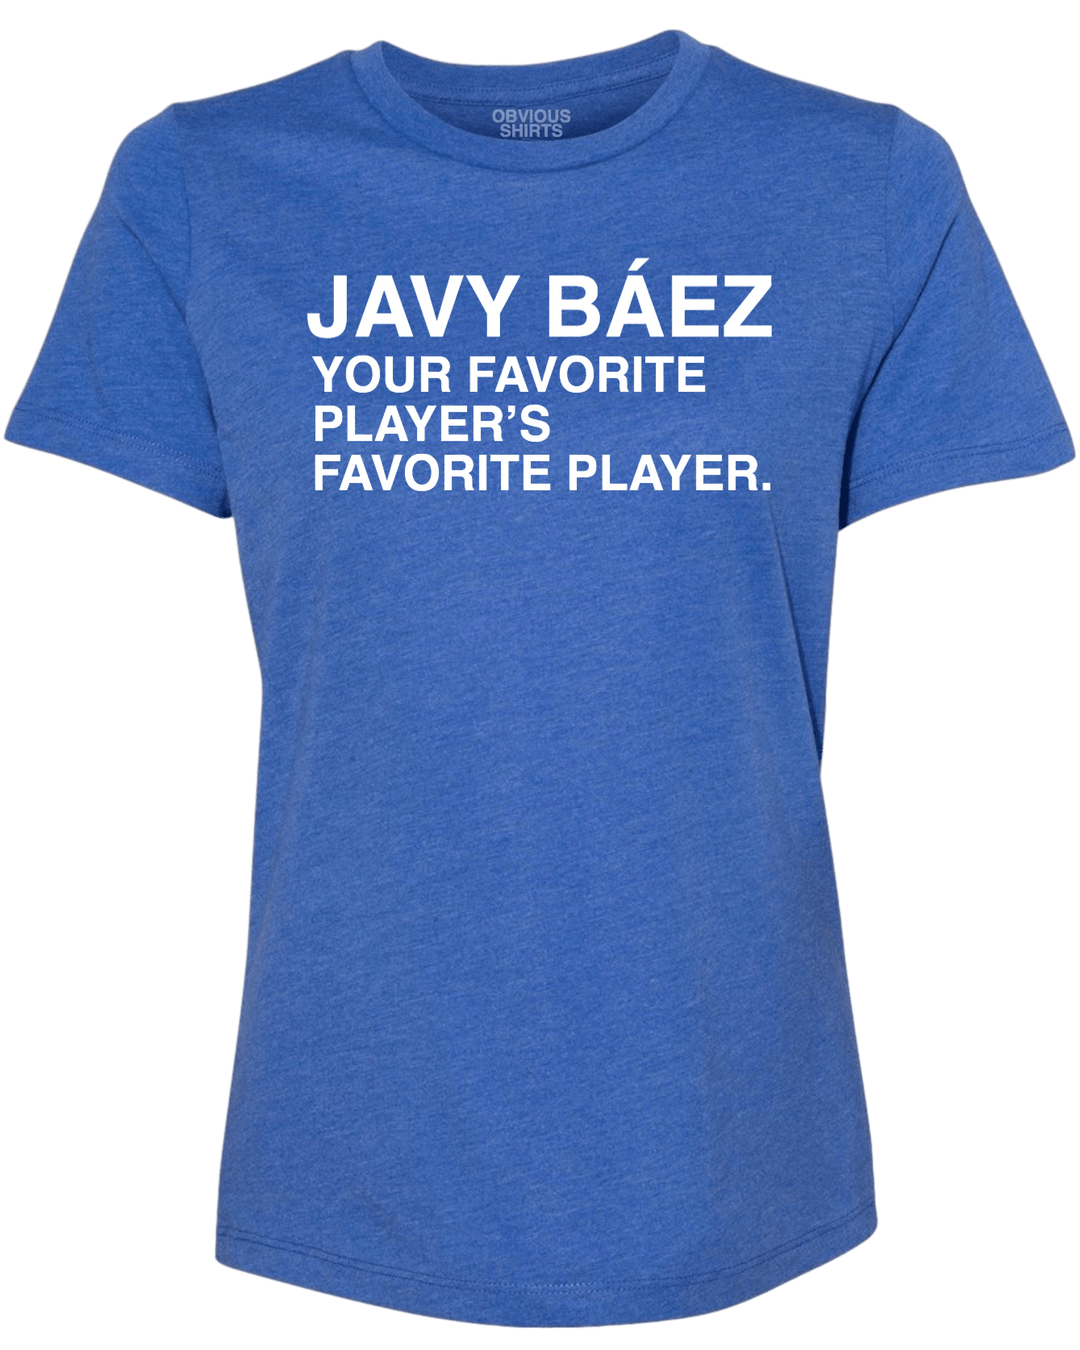 JAVY BAEZ YOUR FAVORITE PLAYER'S FAVORITE PLAYER. (WOMEN'S CREW) - OBVIOUS SHIRTS.